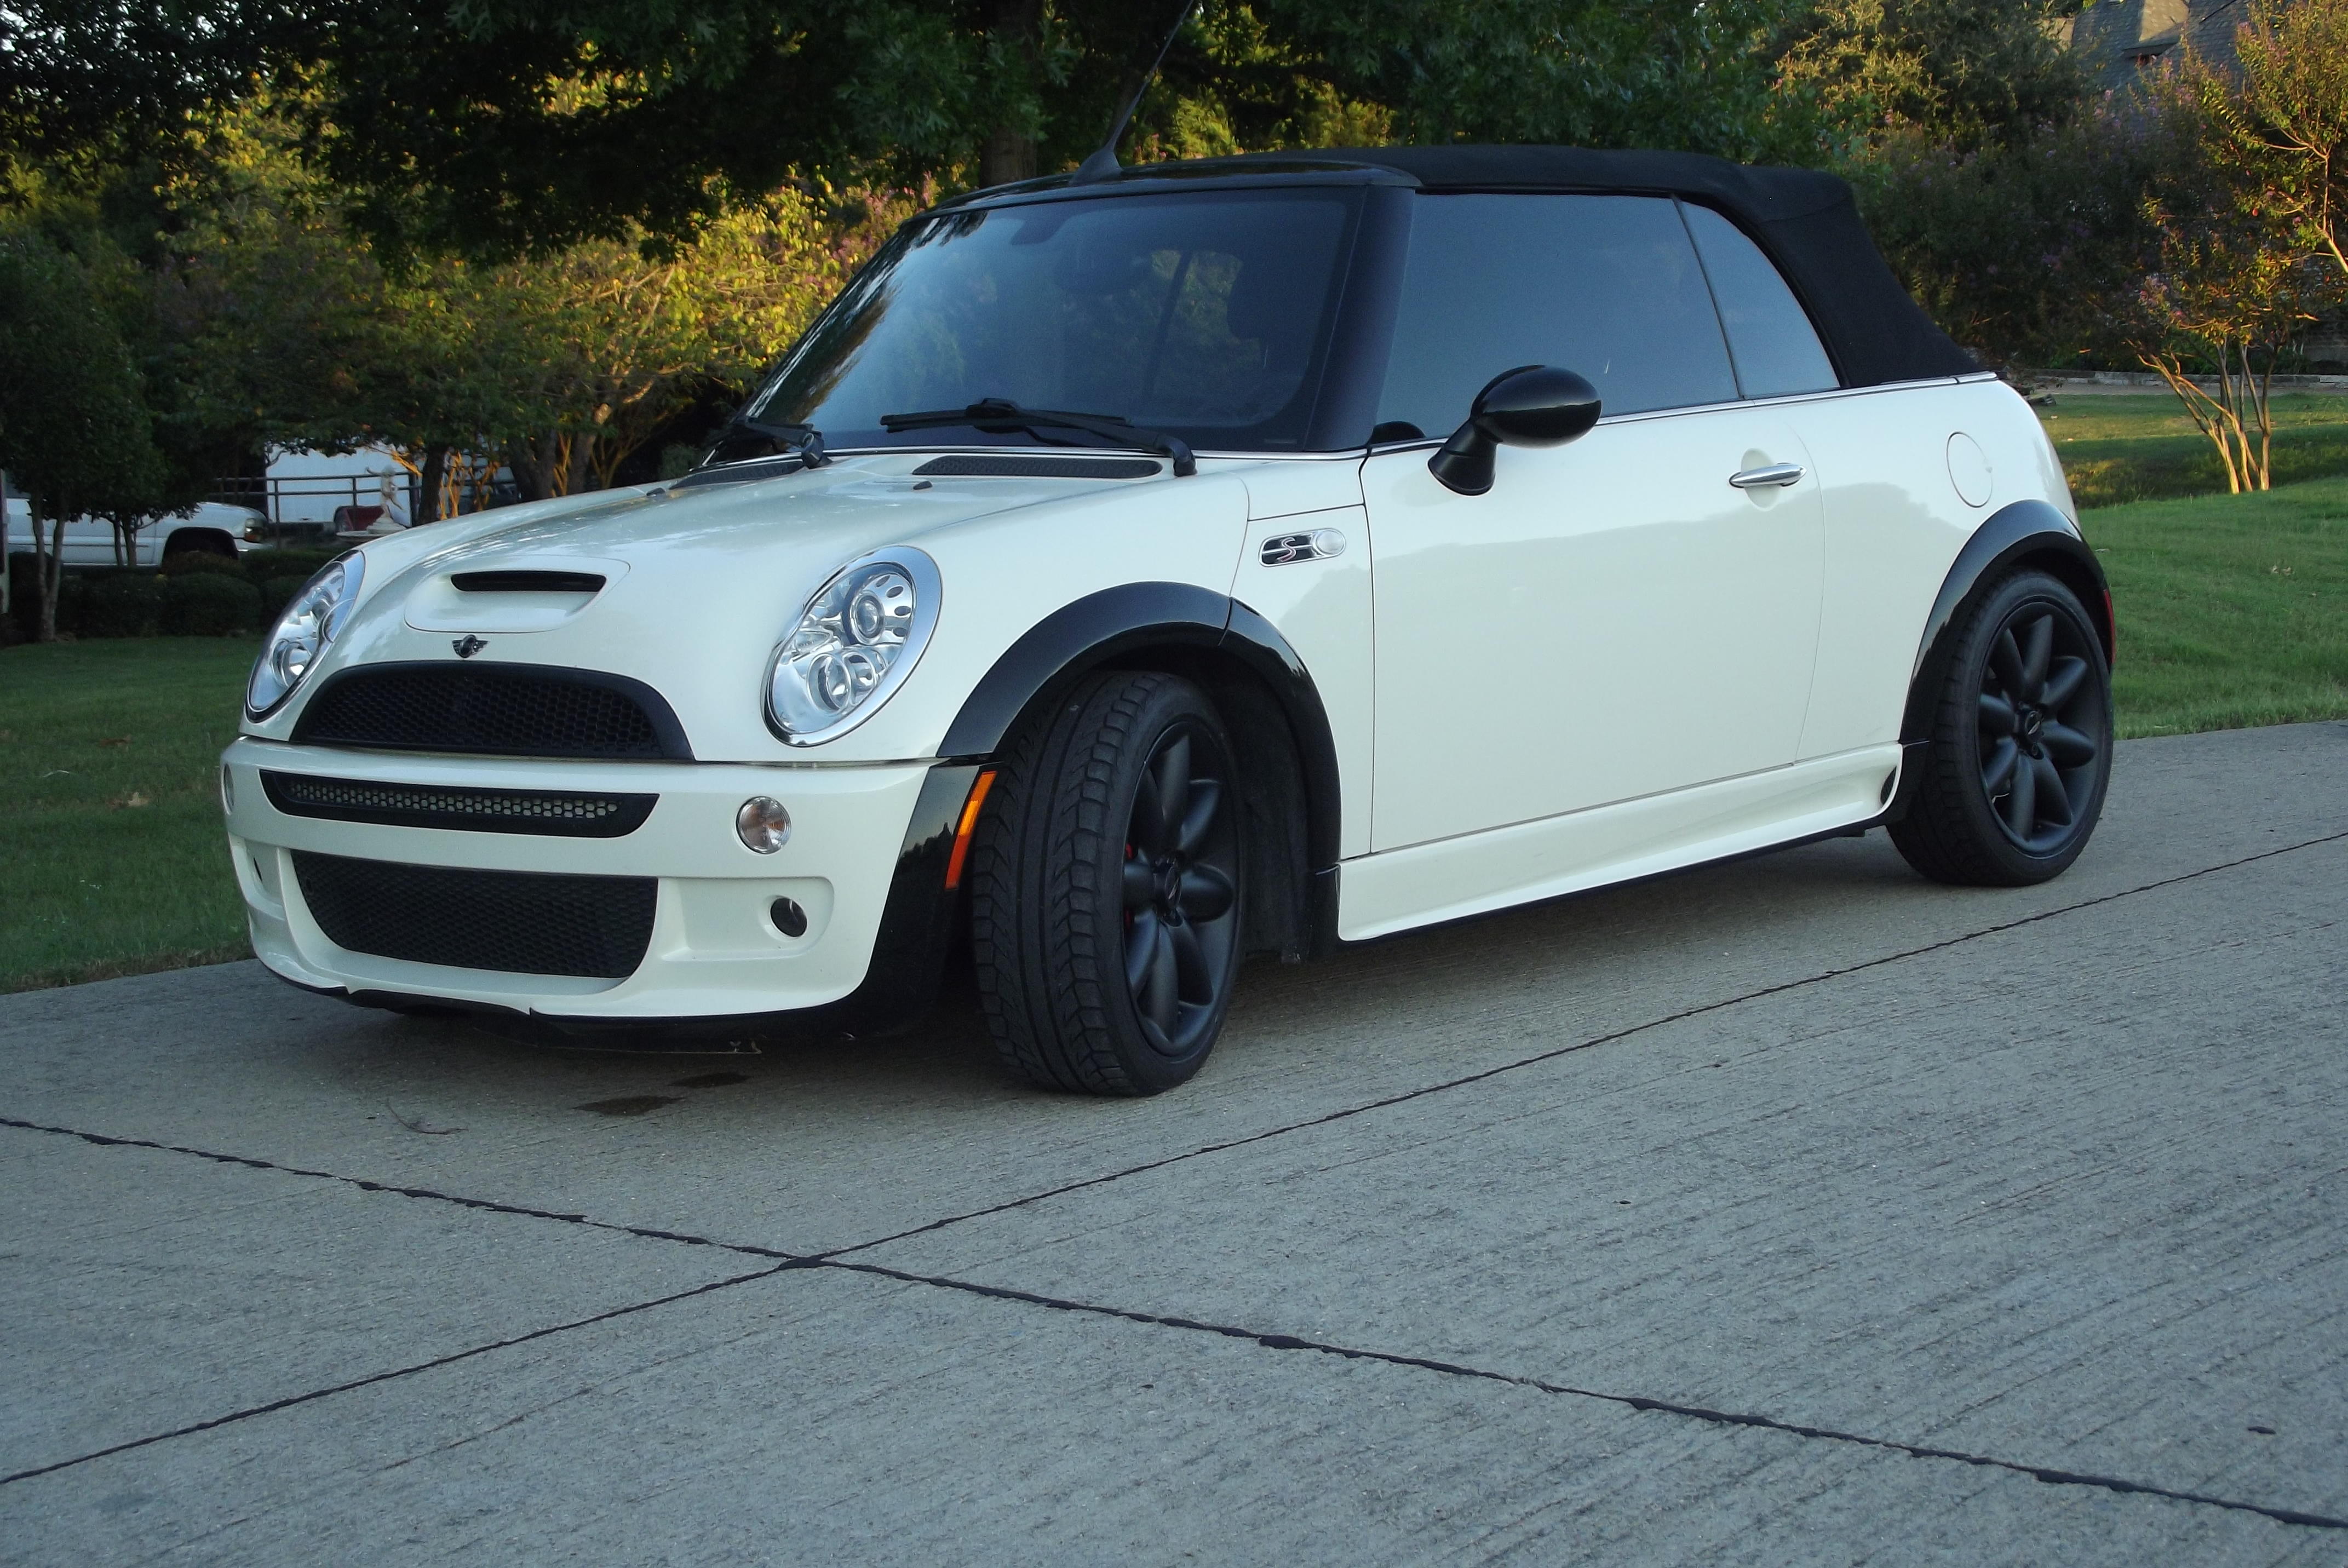 FS:: 2006 R53 JCW Convertible, Fully-optioned - North American Motoring